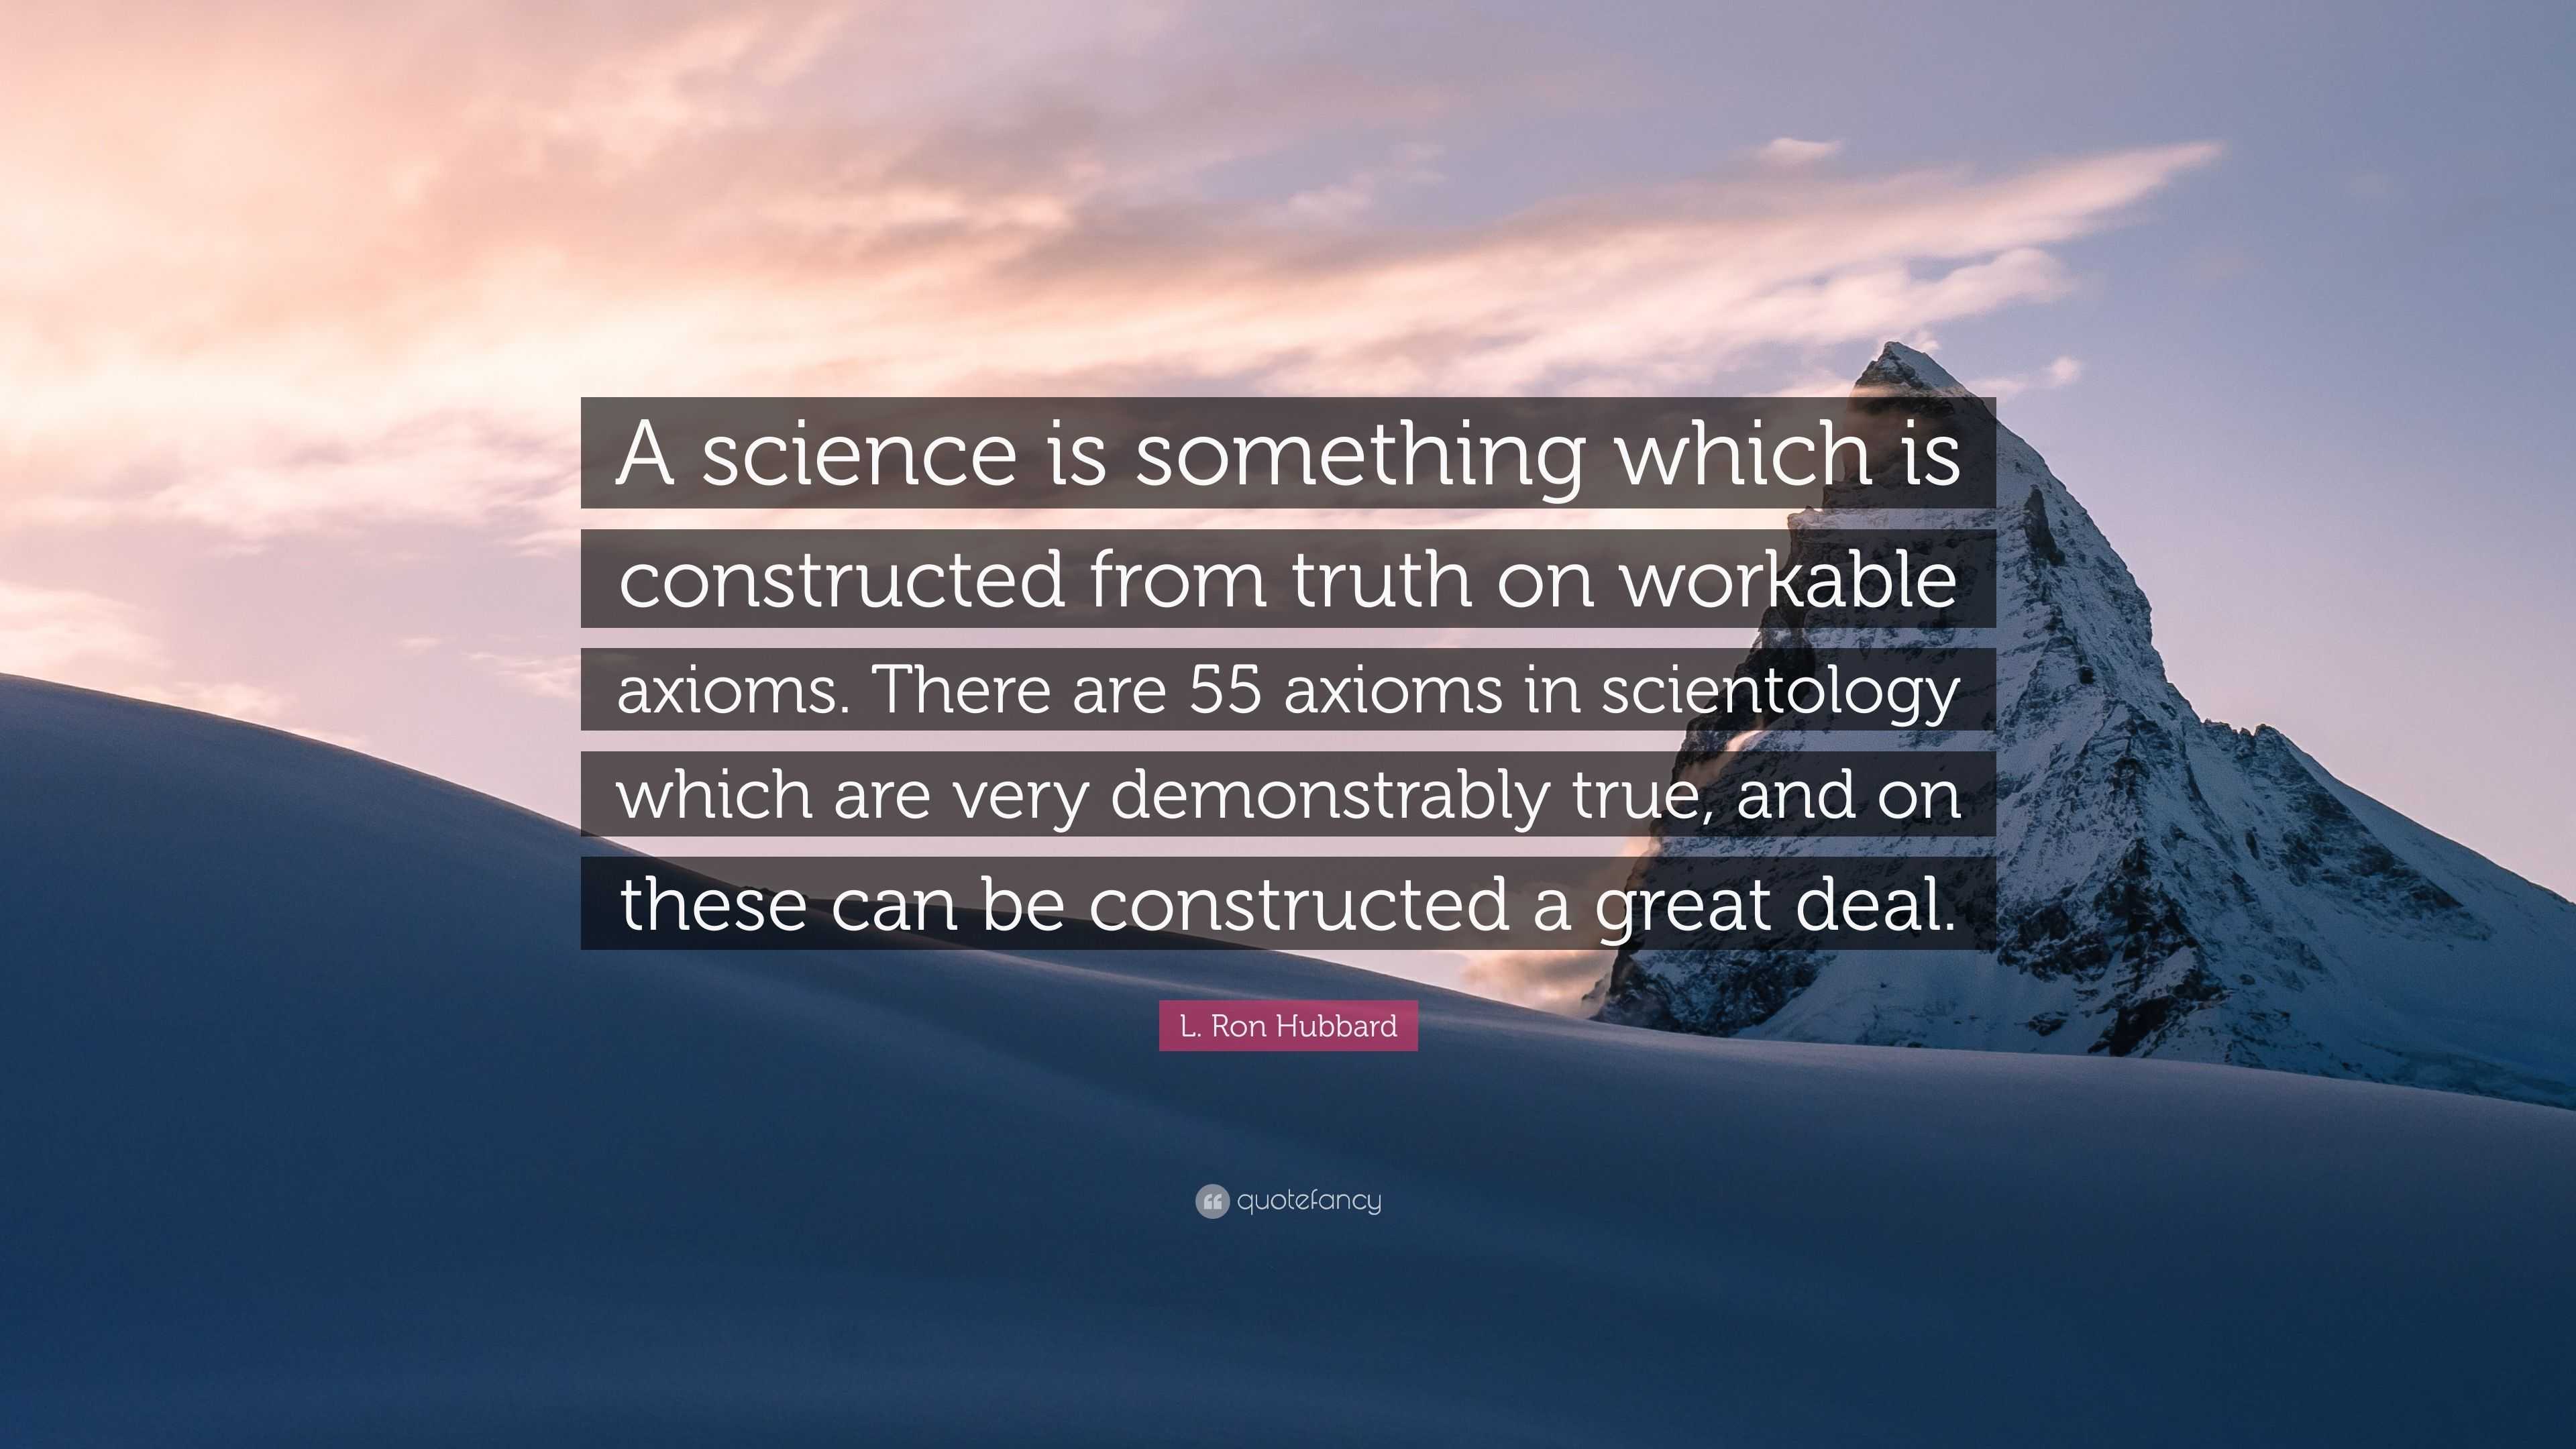 https://quotefancy.com/media/wallpaper/3840x2160/3857942-L-Ron-Hubbard-Quote-A-science-is-something-which-is-constructed.jpg